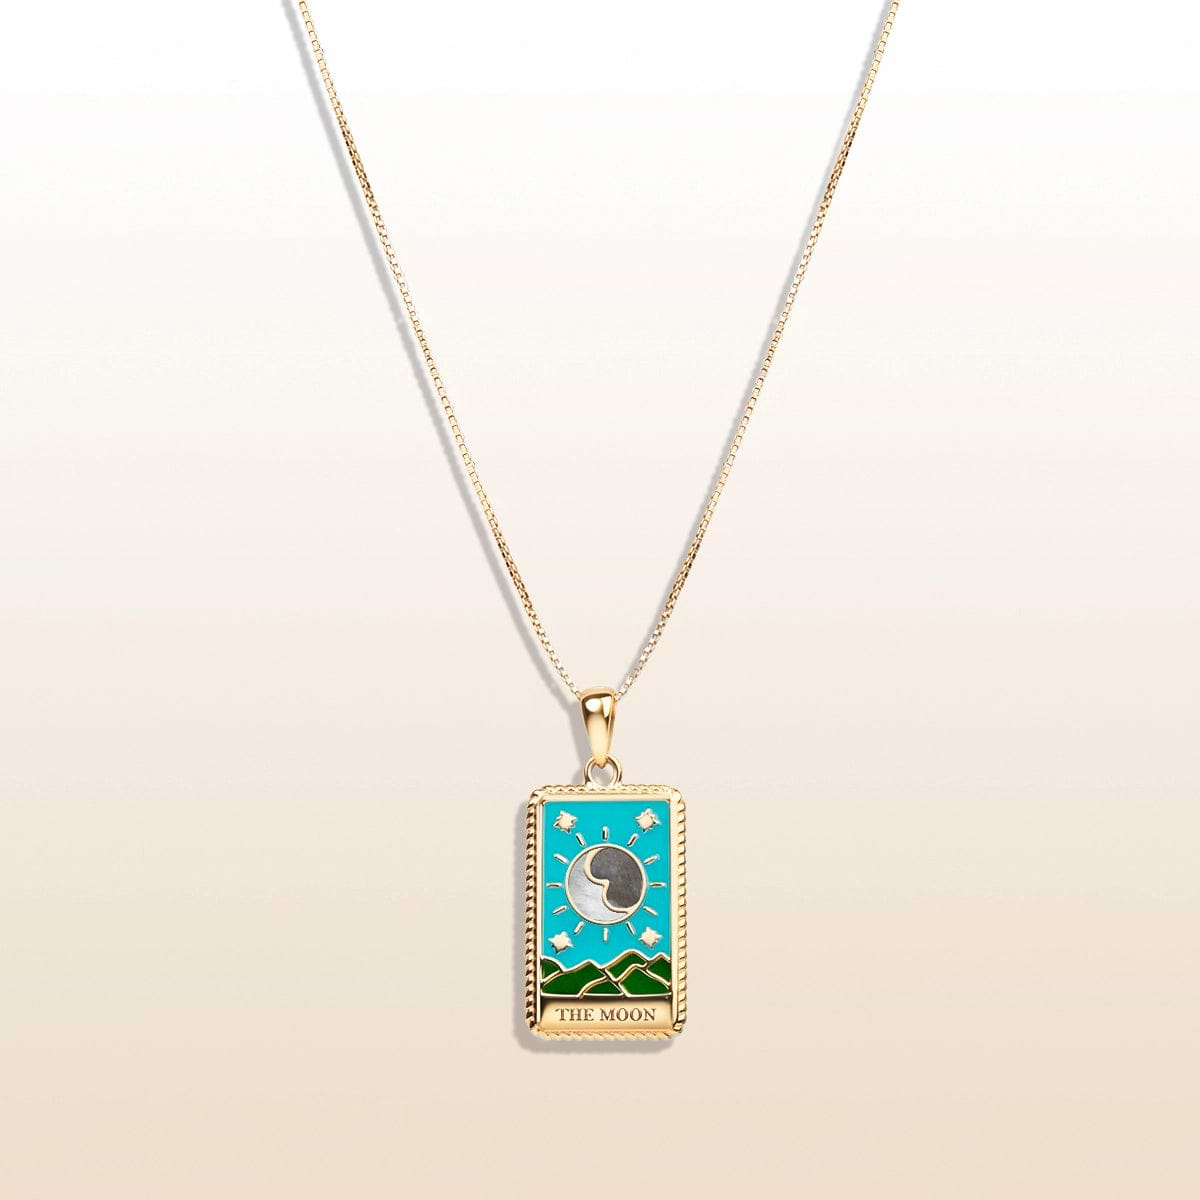 Divine Guidance - "The Moon" Tarot Card Necklace